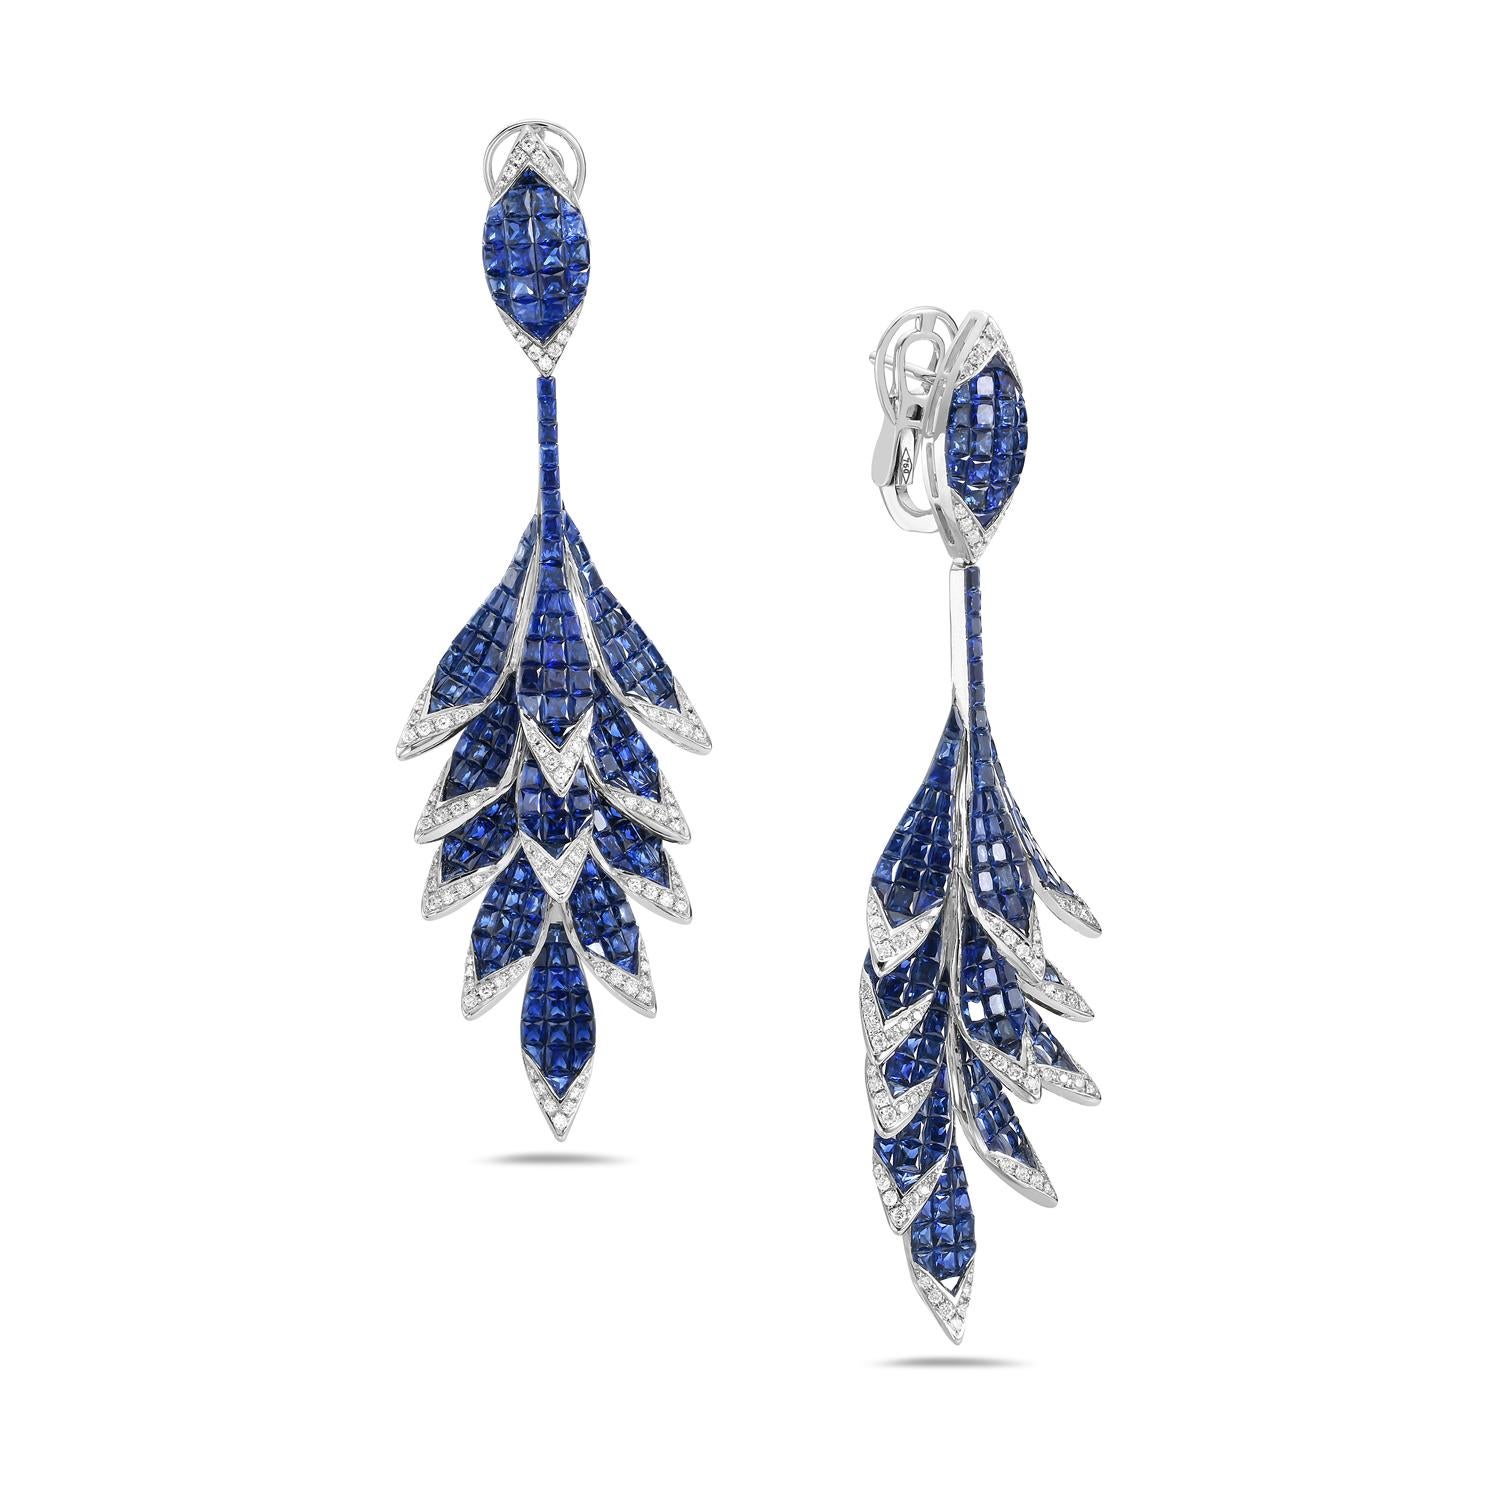 Art Nouveau 36.52 ct Blue Sapphire Studded Dangle Earrings Made In 18k Gold With Diamonds For Sale